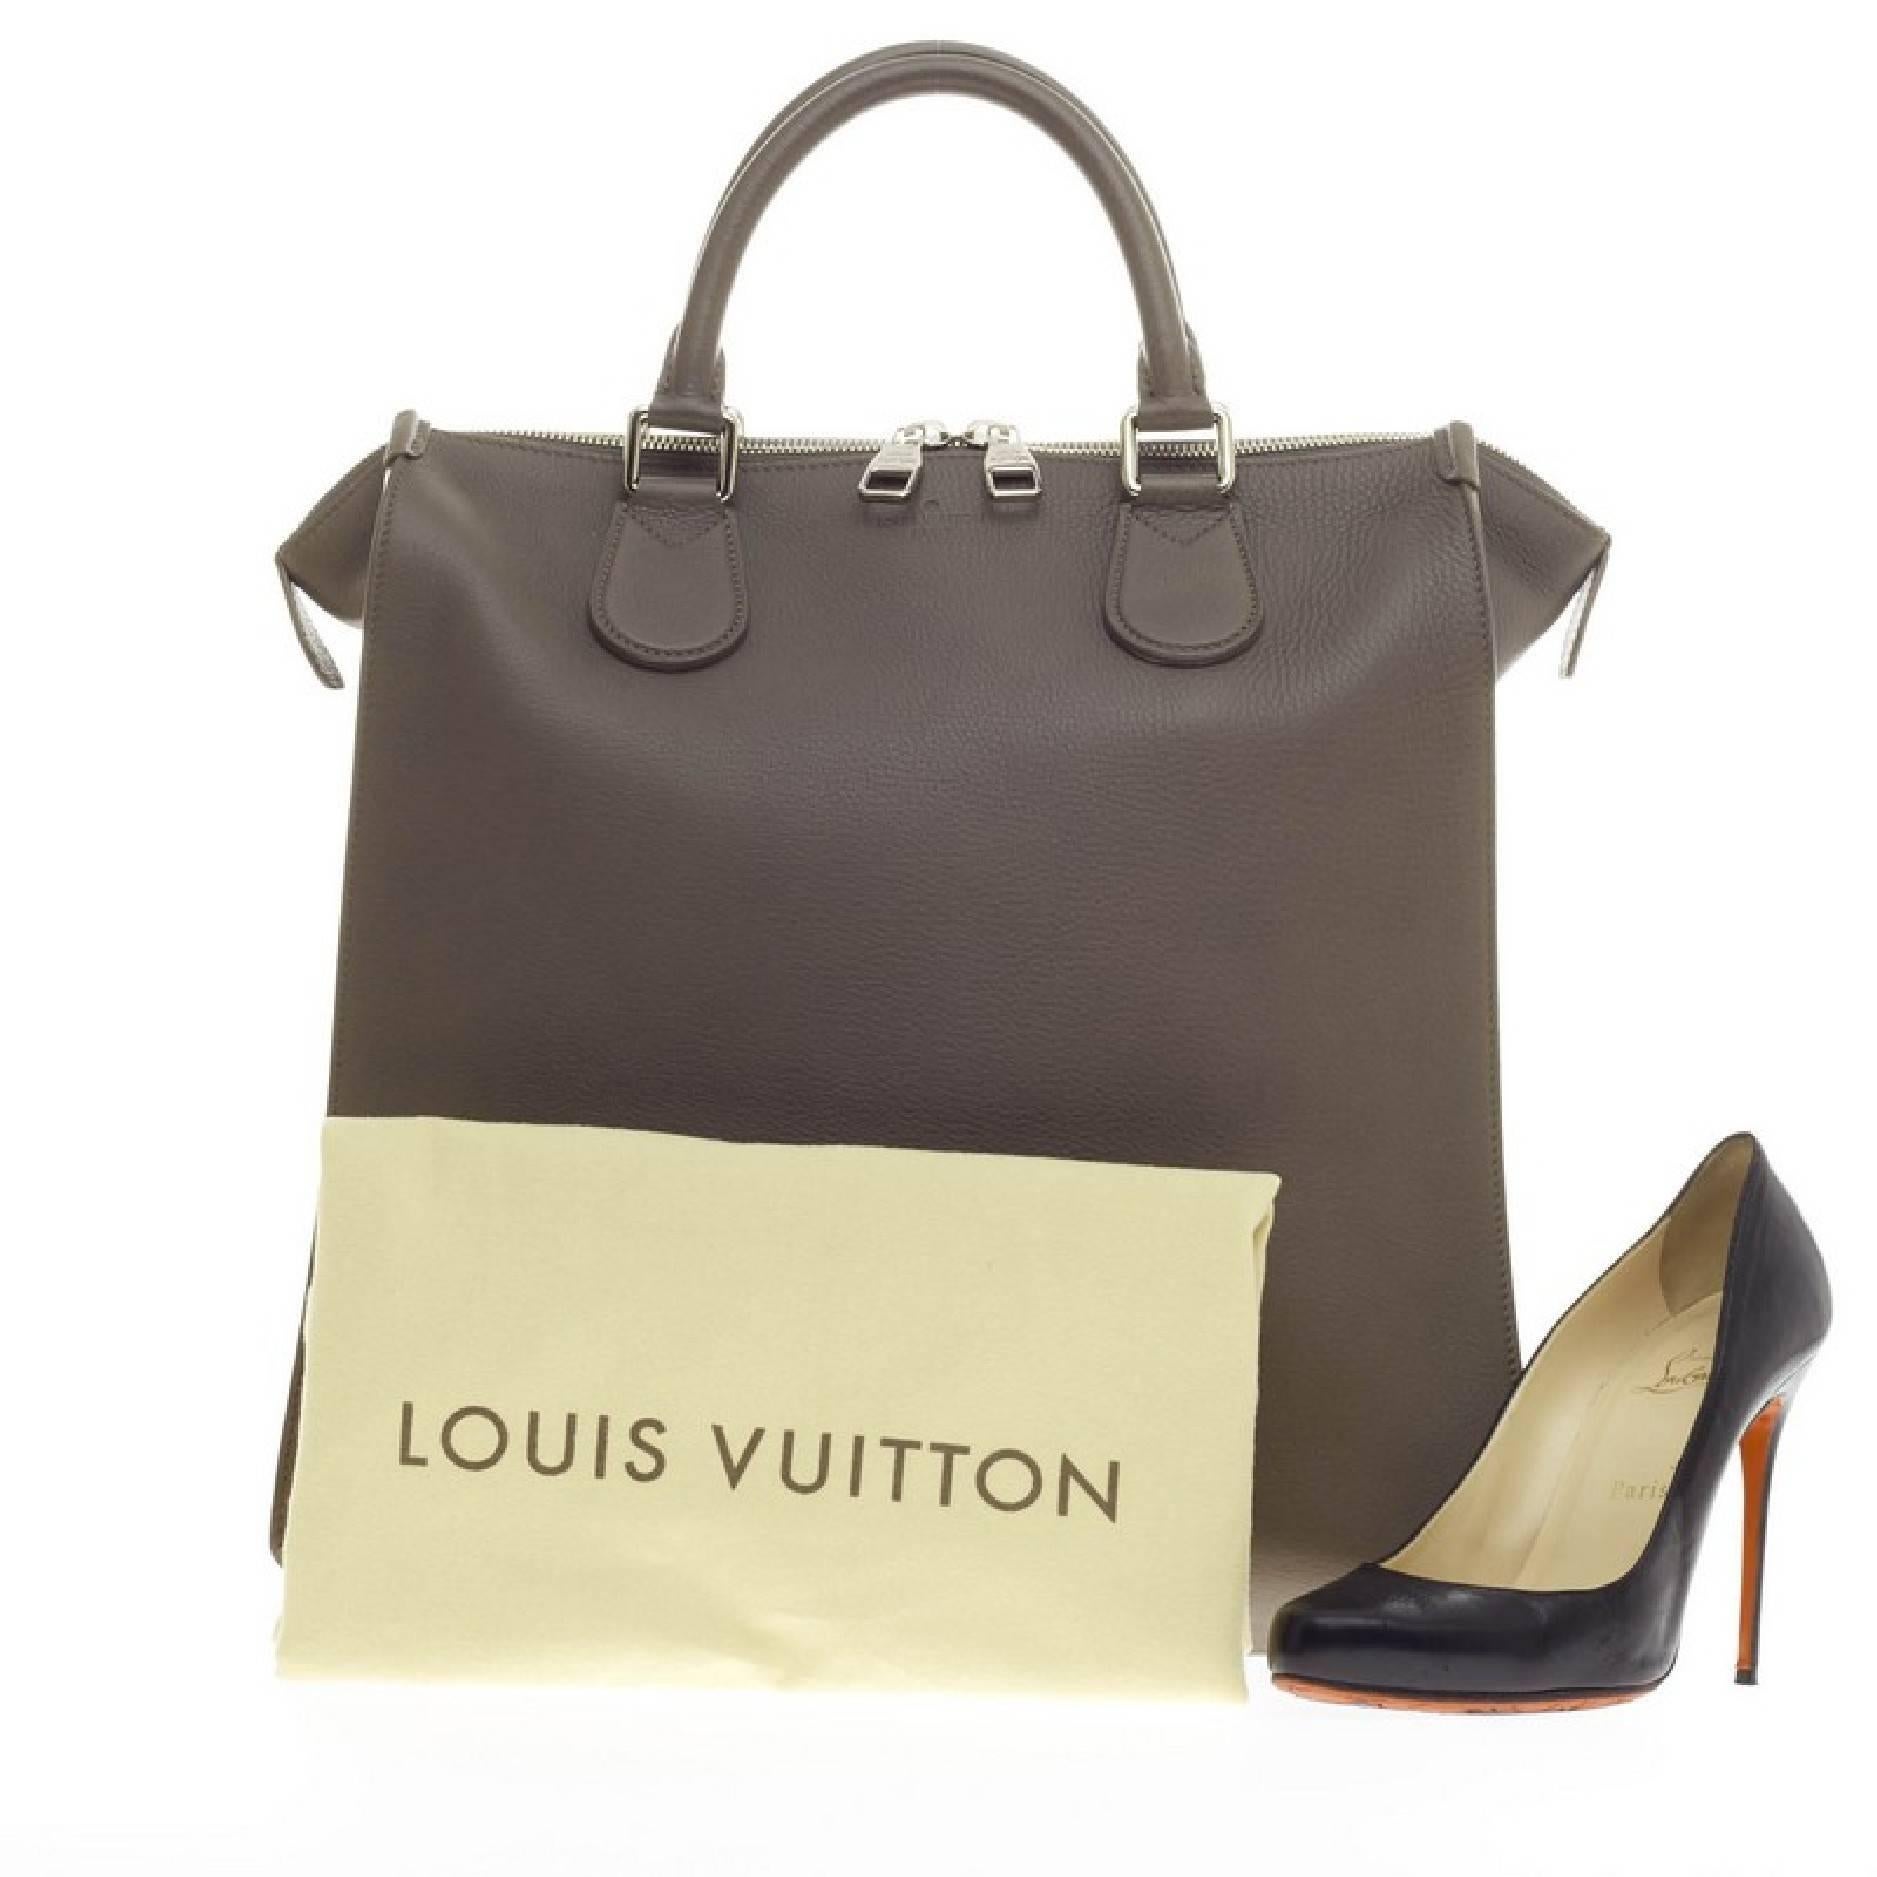 This authentic Louis Vuitton Cabas Naxos Leather named after the popular Greek island of Naxos presented in the brand's Spring/Summer 2009 Collection showcases the first of its Naxos leather. Crafted in taupe naxos supple leather, this understated